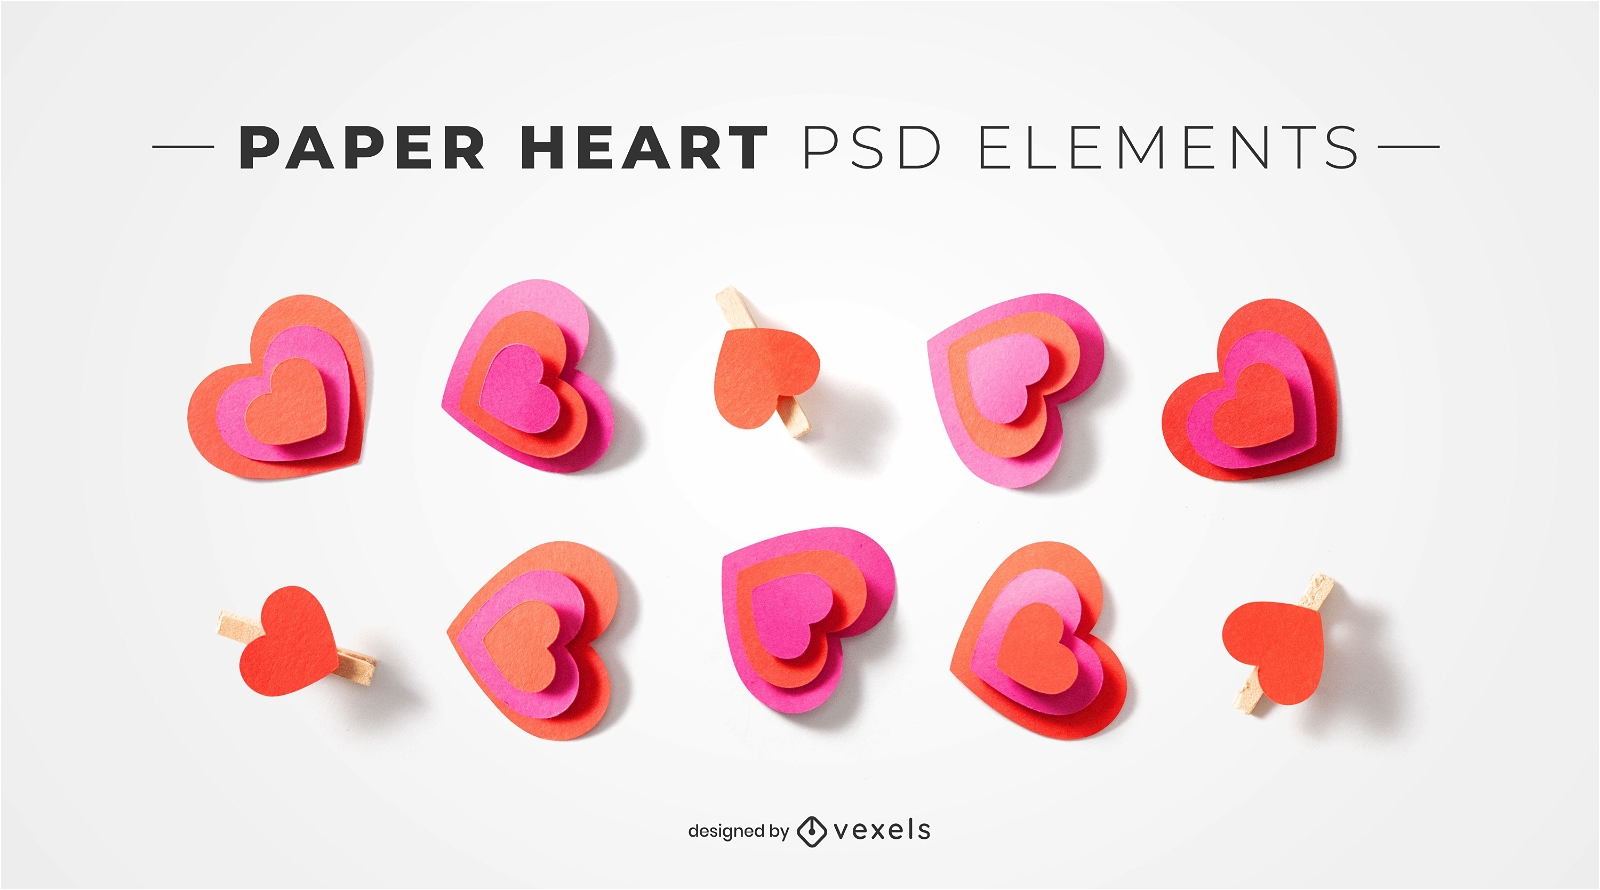 Paper heart psd elements for mockups